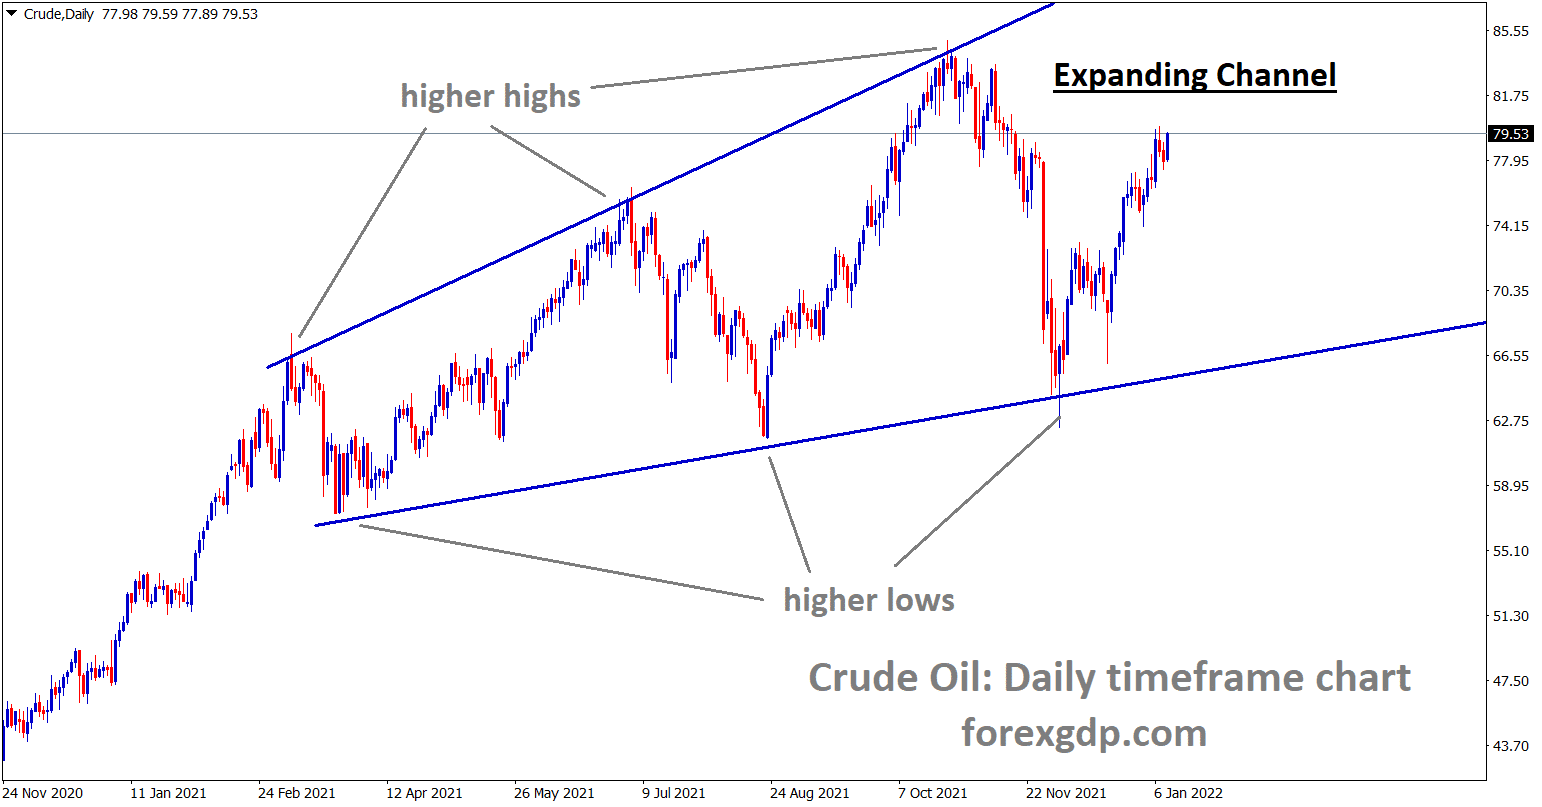 Crude Oil is moving in an Expanding channel pattern